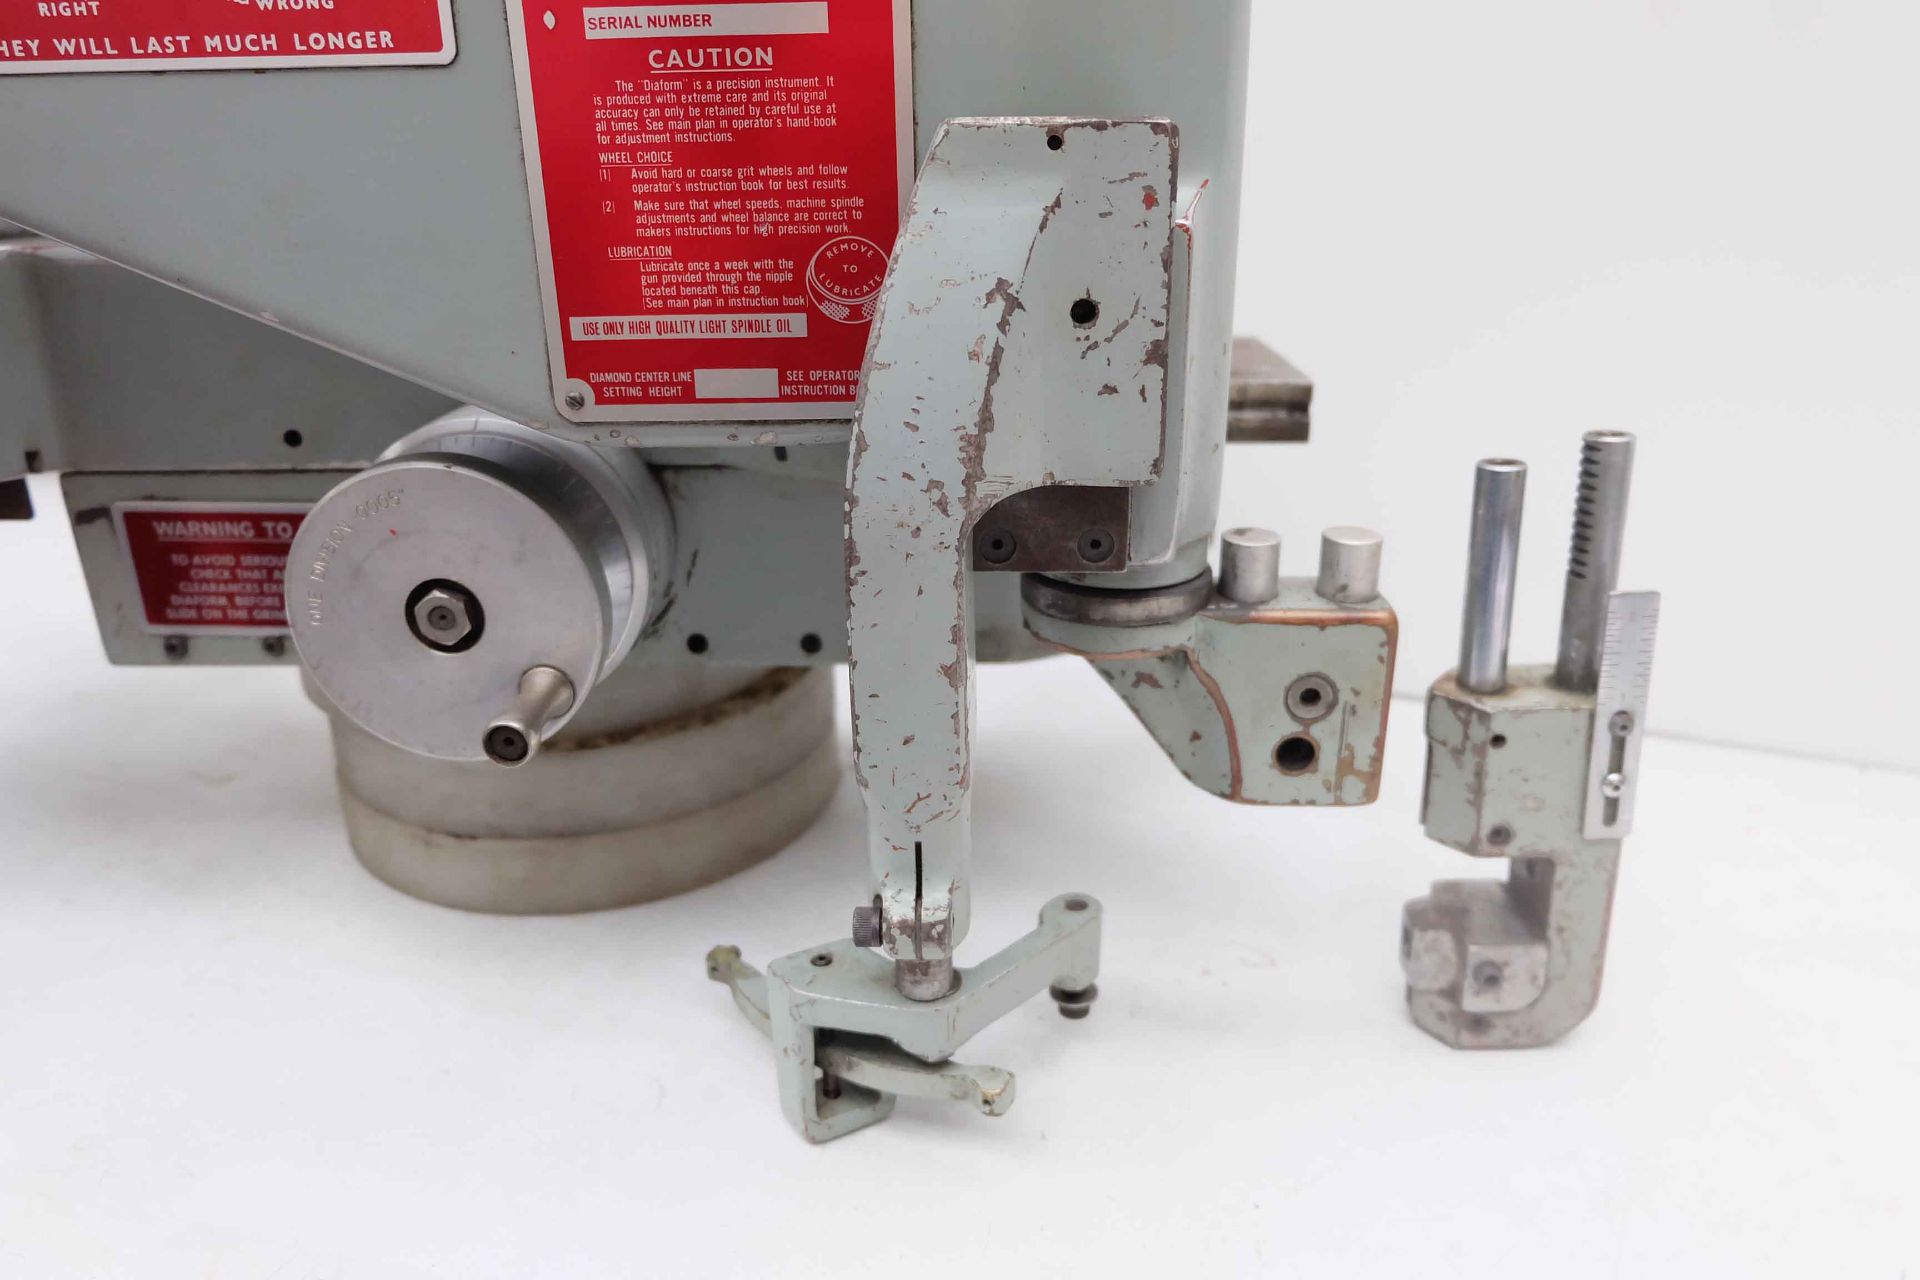 Diaform Wheel Forming Attachment for Jones & Shipman 540 Surface Grinding Machine. - Image 7 of 7